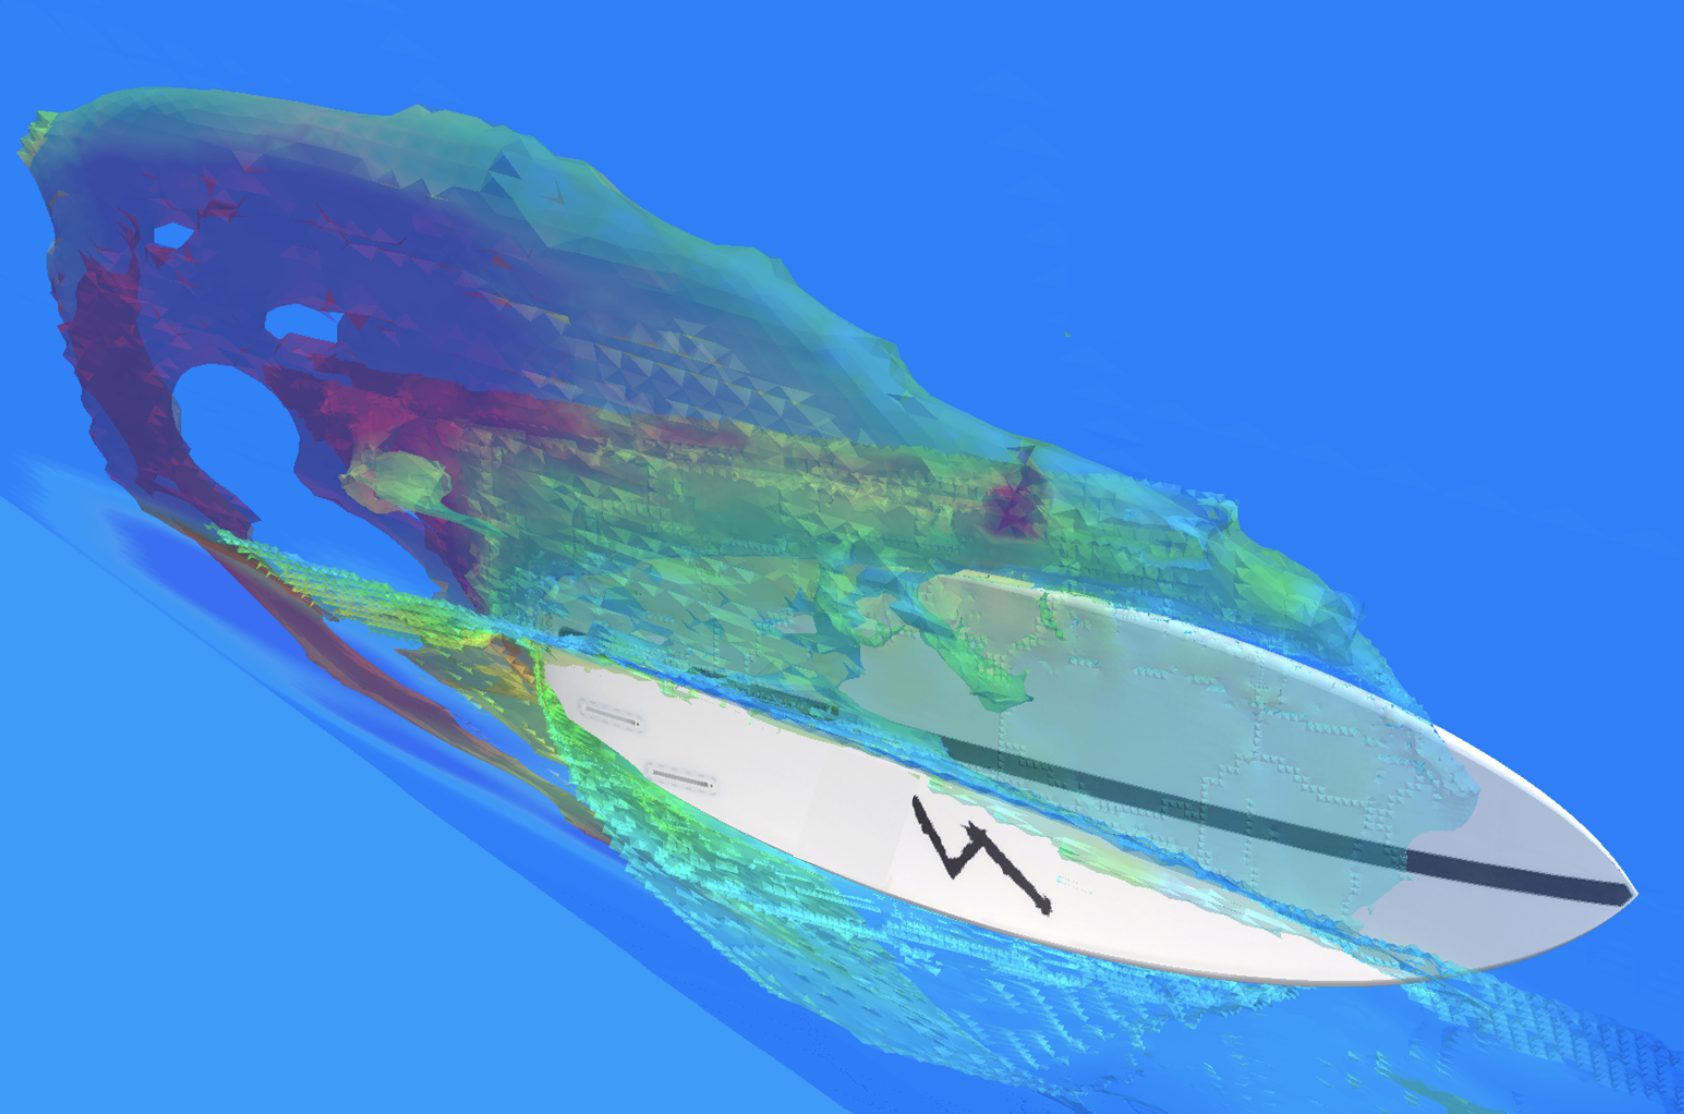 Simulation of a surfboard